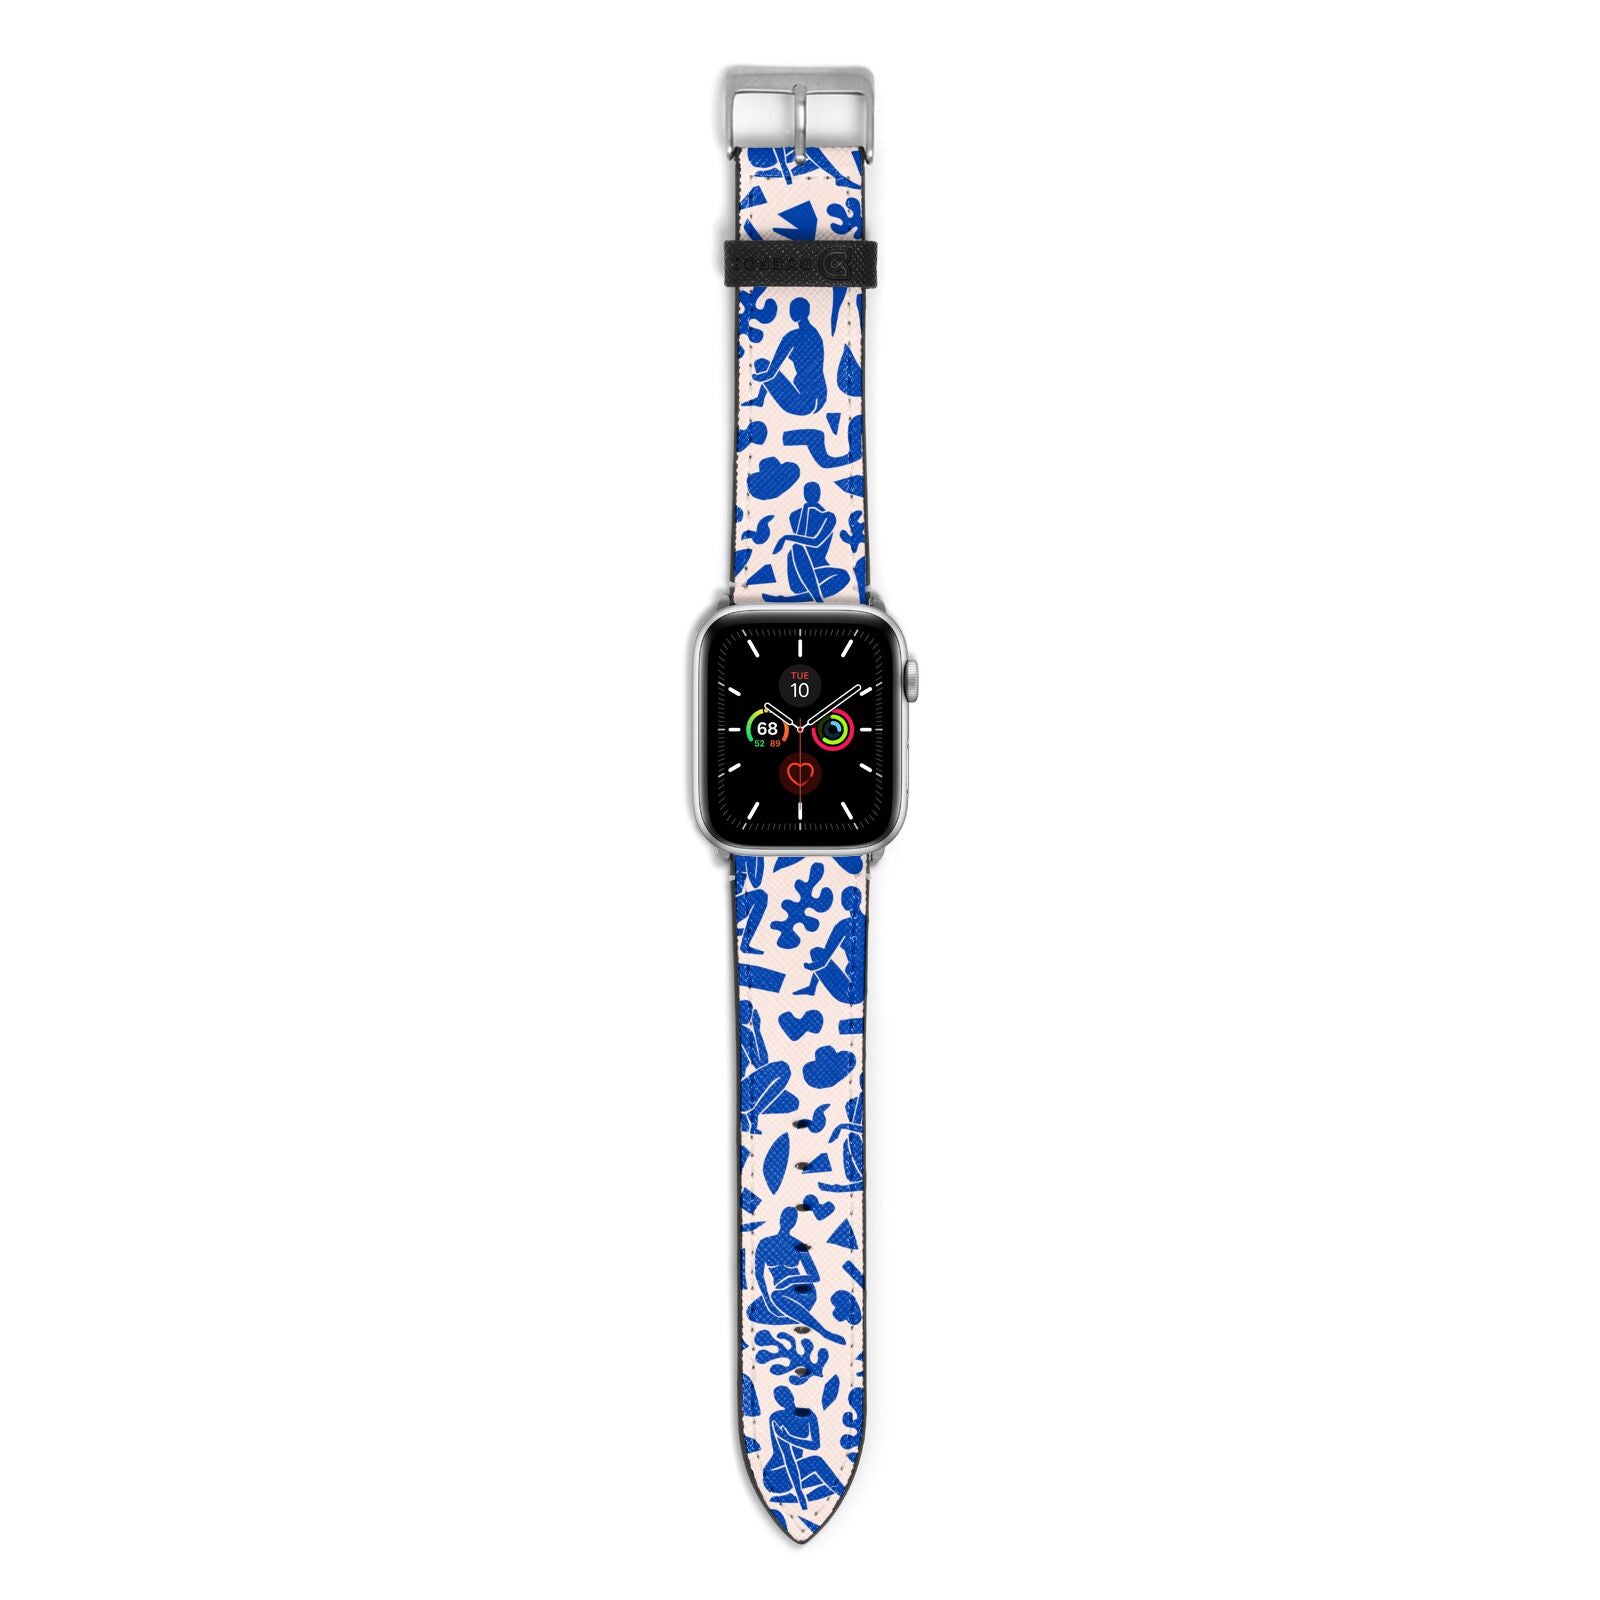 Abstract Art Apple Watch Strap with Silver Hardware